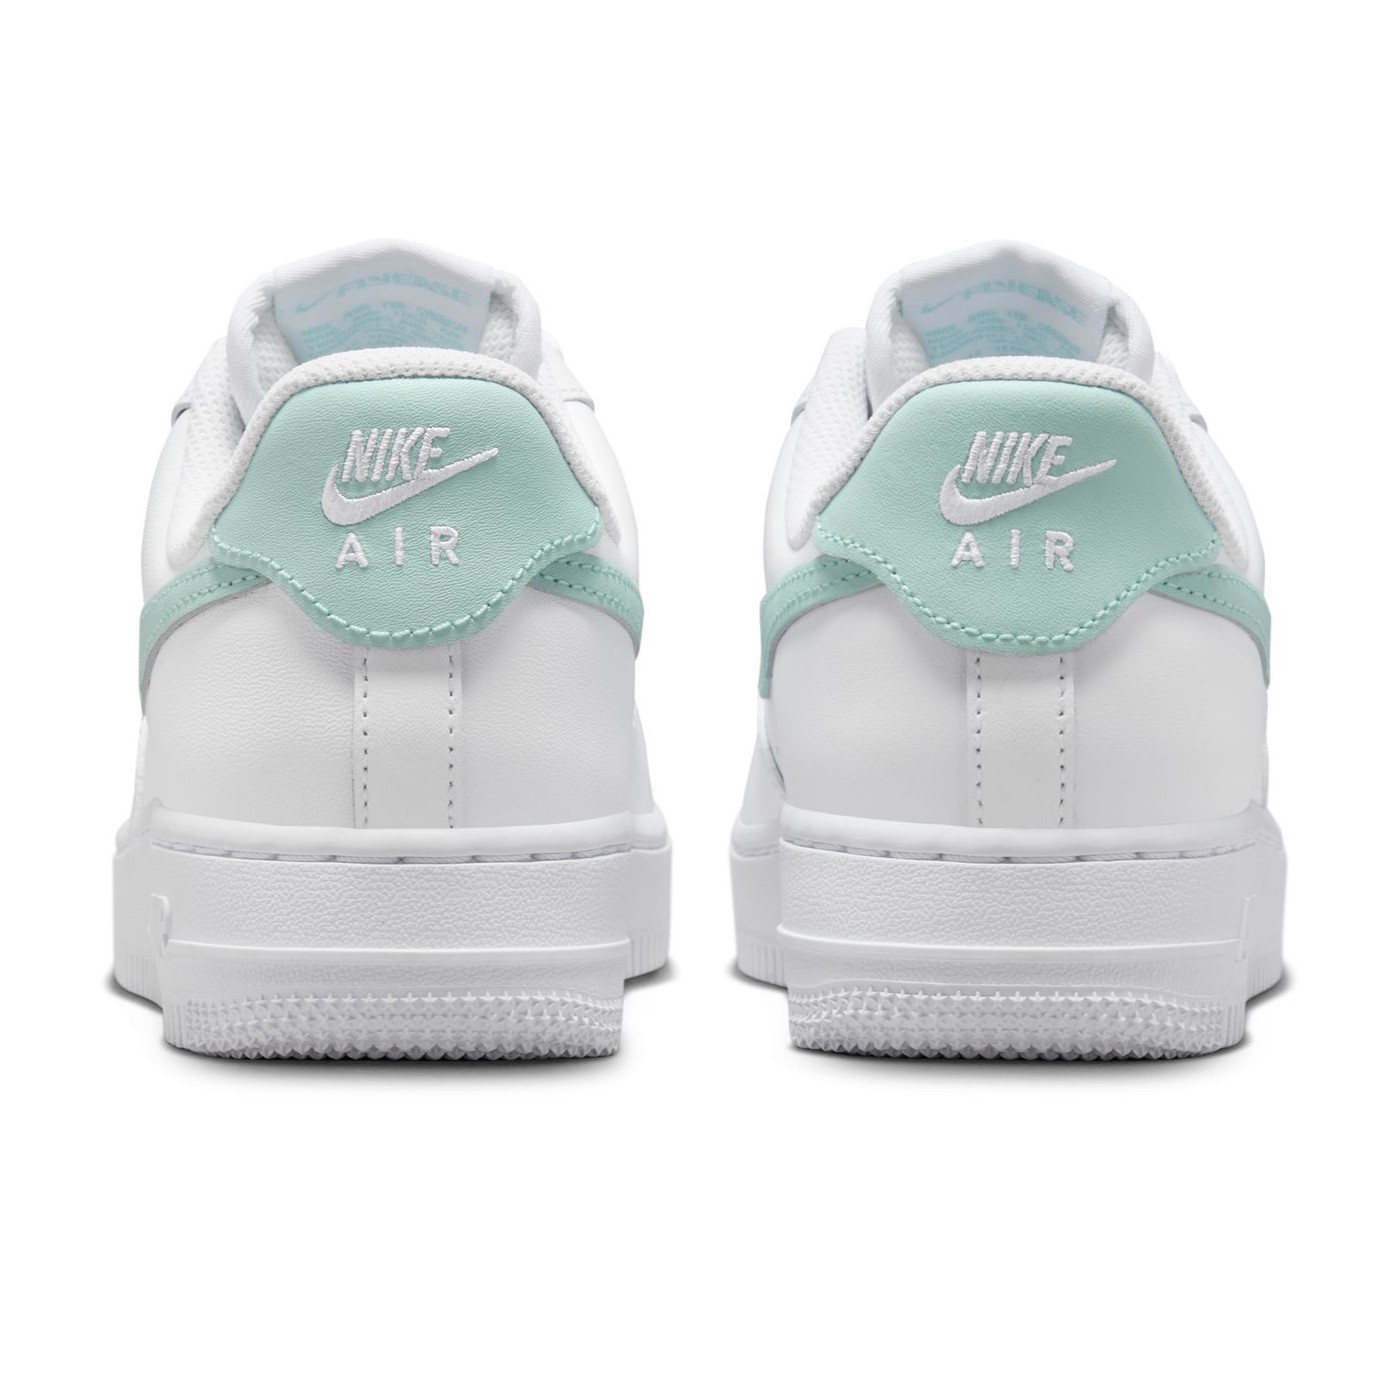 GIÀY THỂ THAO NIKE NỮ AIR FORCE 1 07 EASYON WHITE ICE JADE WOMENS SHOES DX5883-101 10